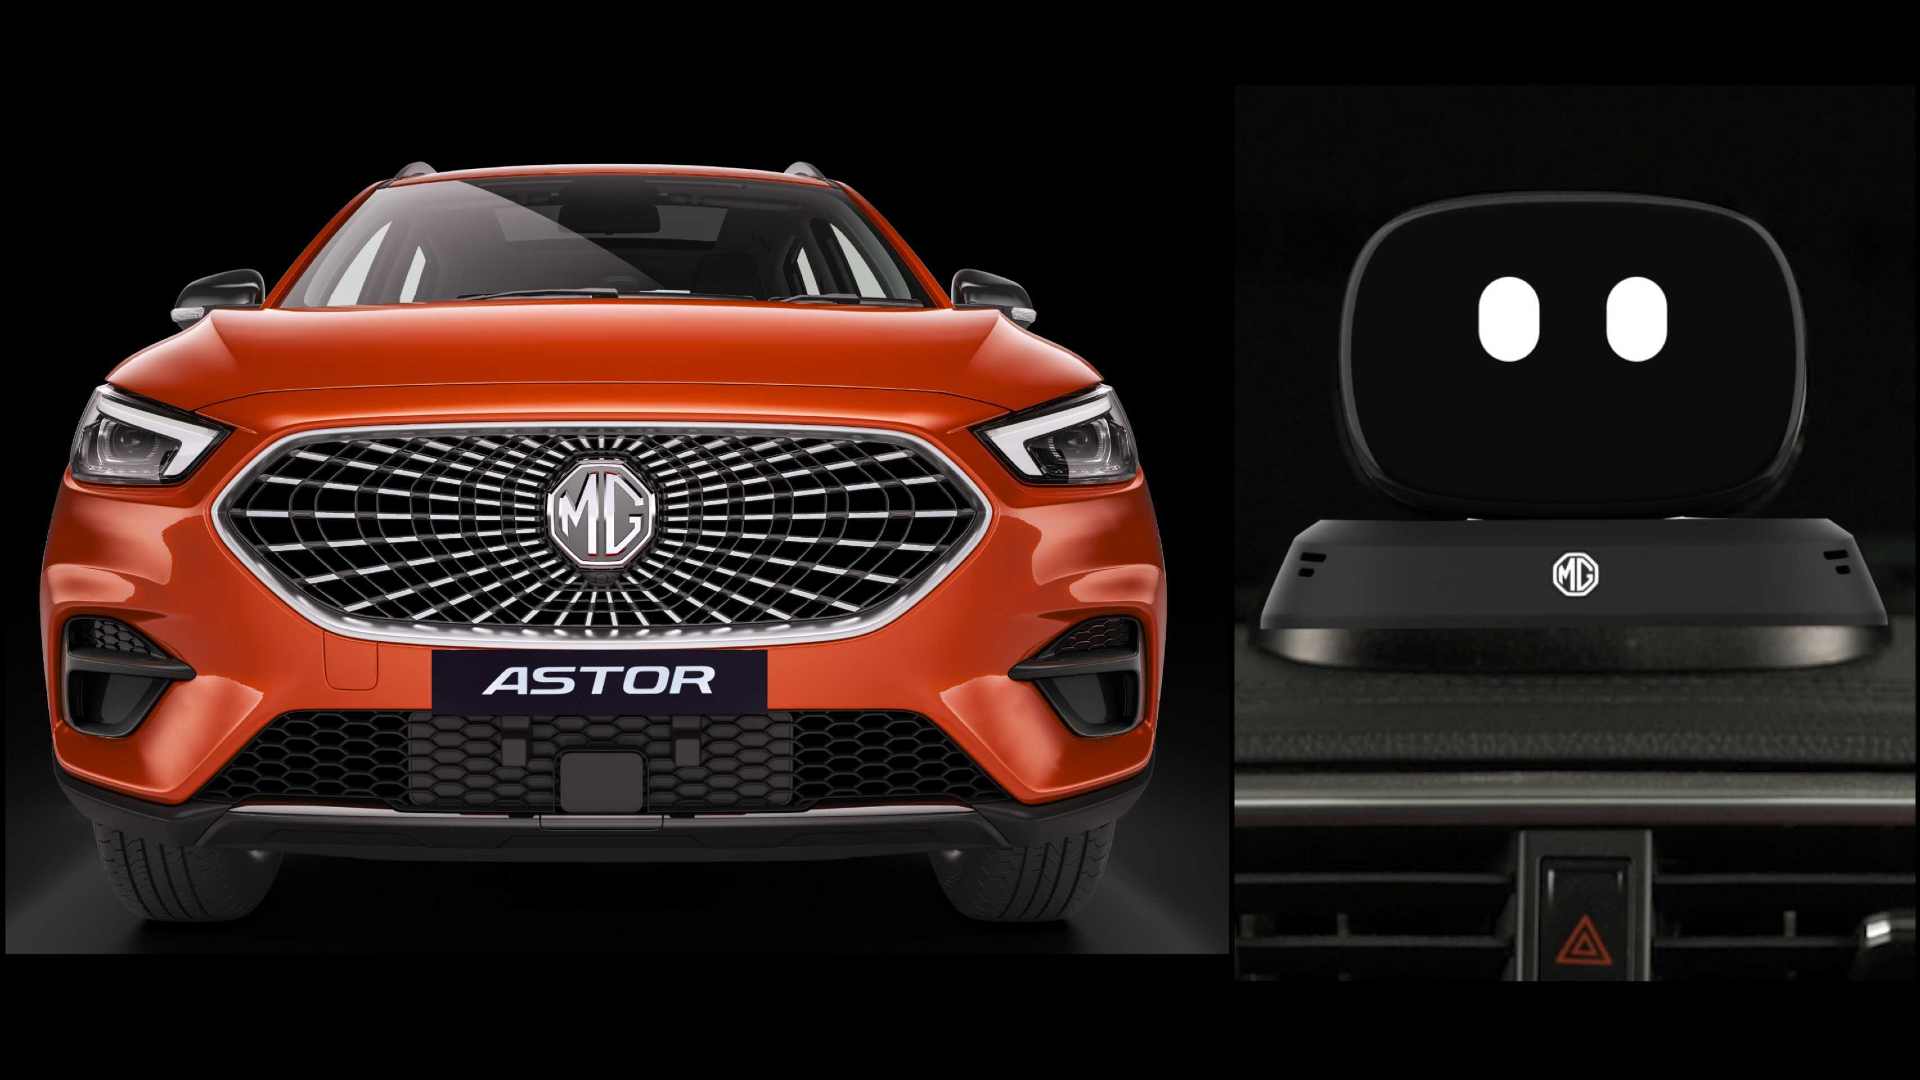 The MG Astor is the first SUV in India to feature an AI-powered robot inside the vehicle. Image: MG Motor India